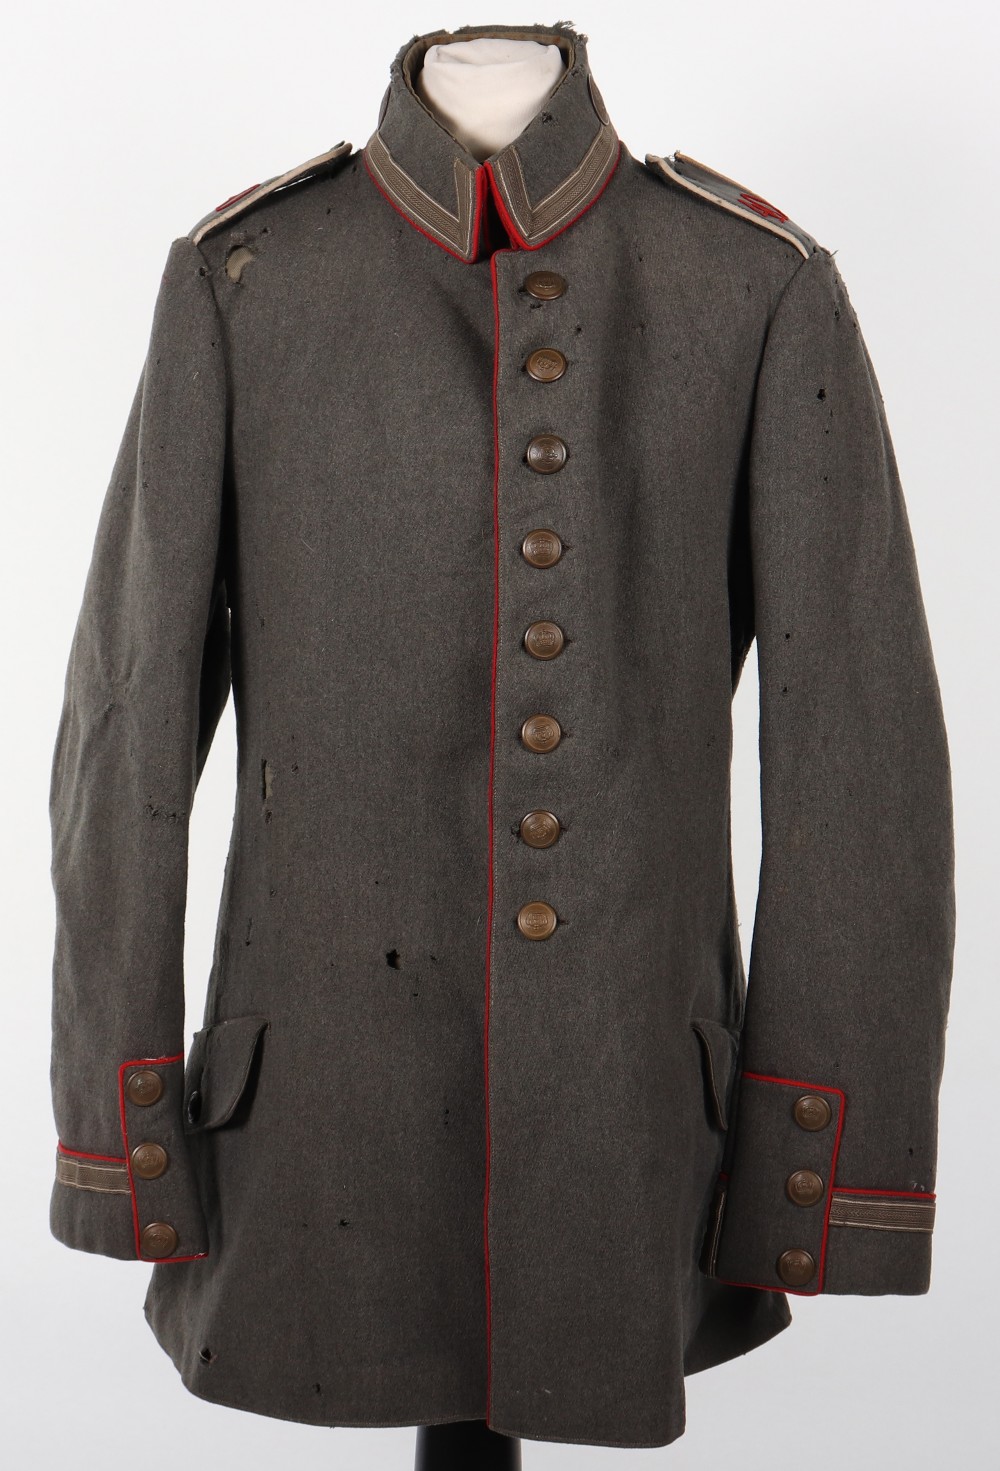 Imperial German Field Grey NCO’s Combat Tunic